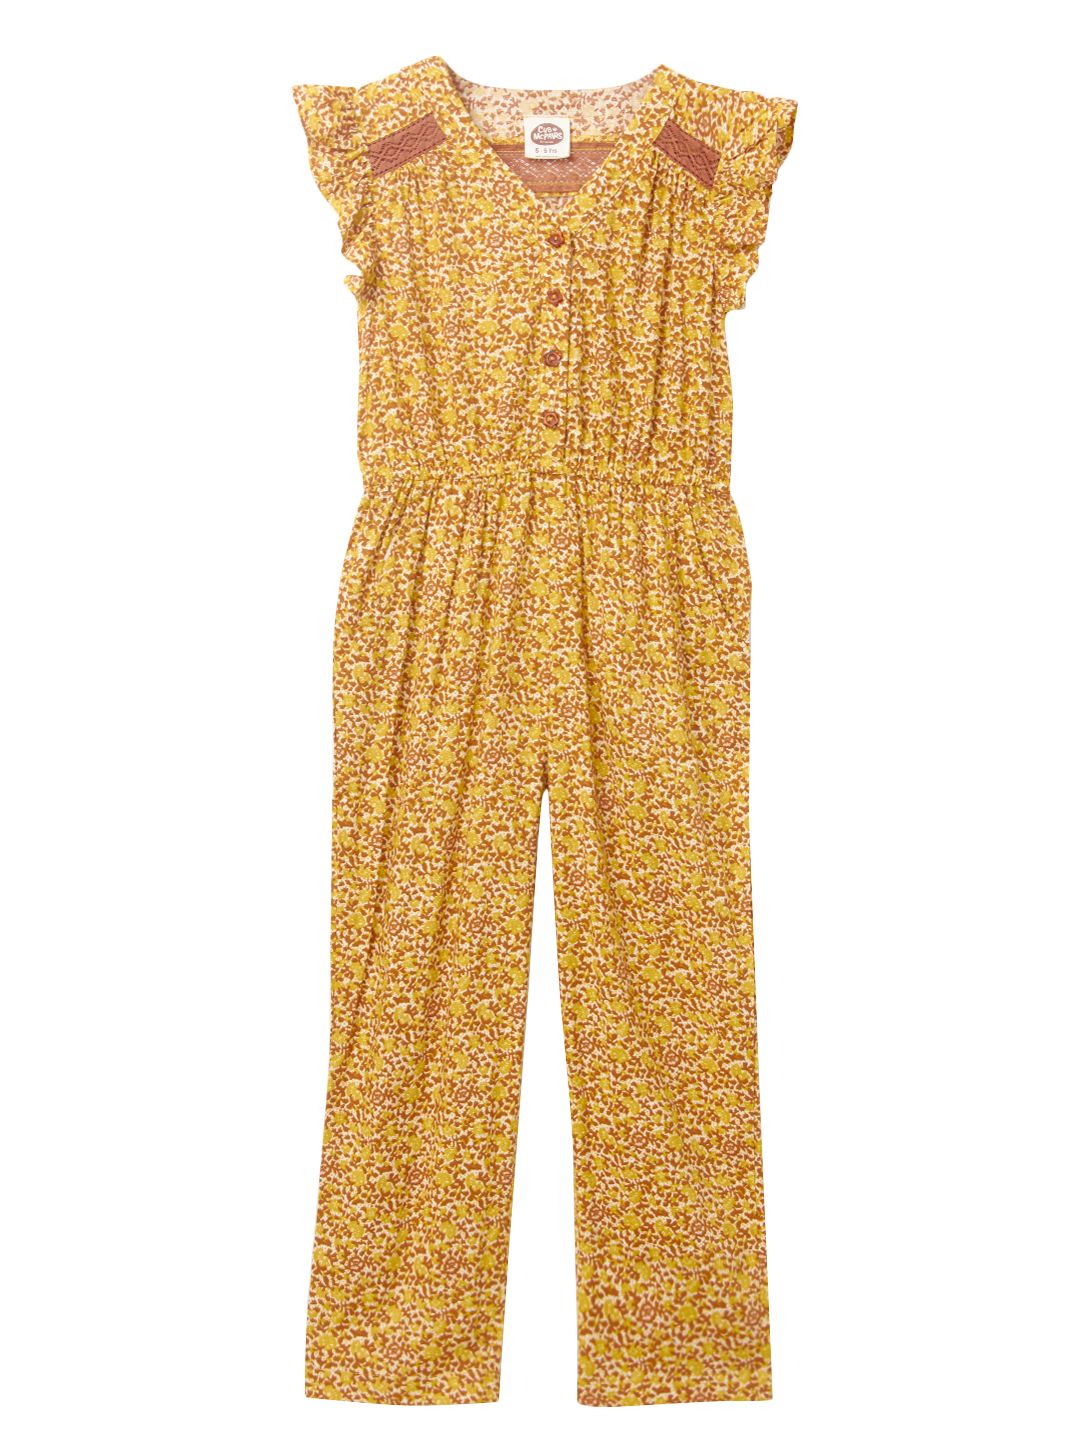 Girls' Jumpsuits and Playsuits - 25-75% OFF - Buy Jumpsuits and Playsuits  for Girls Online - Dubai, Abu Dhabi, UAE - Namshi